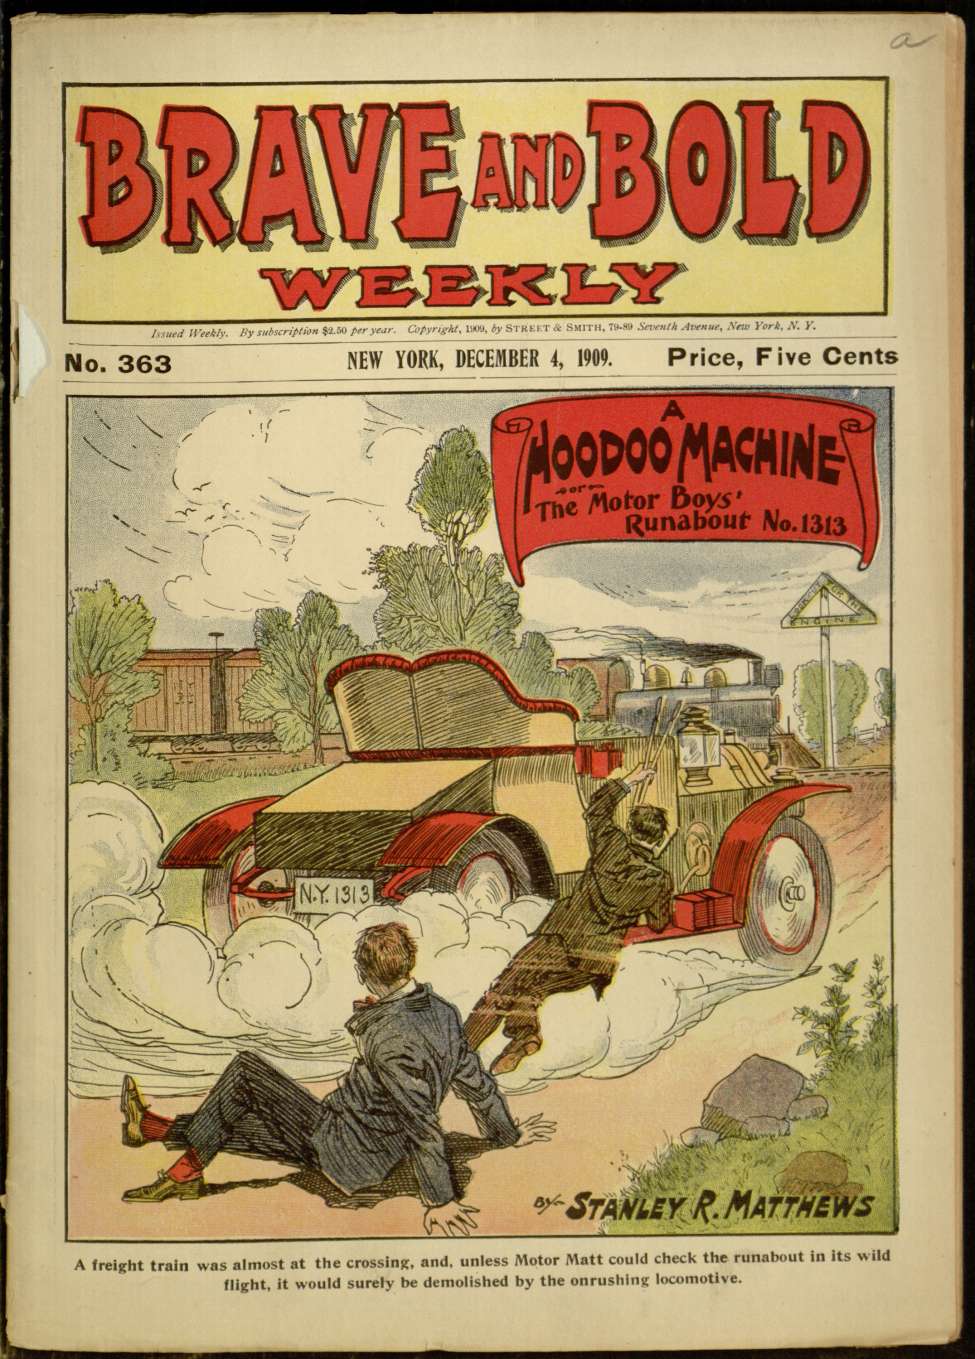 Book Cover For Brave and Bold 363 - A Hoodoo Machine